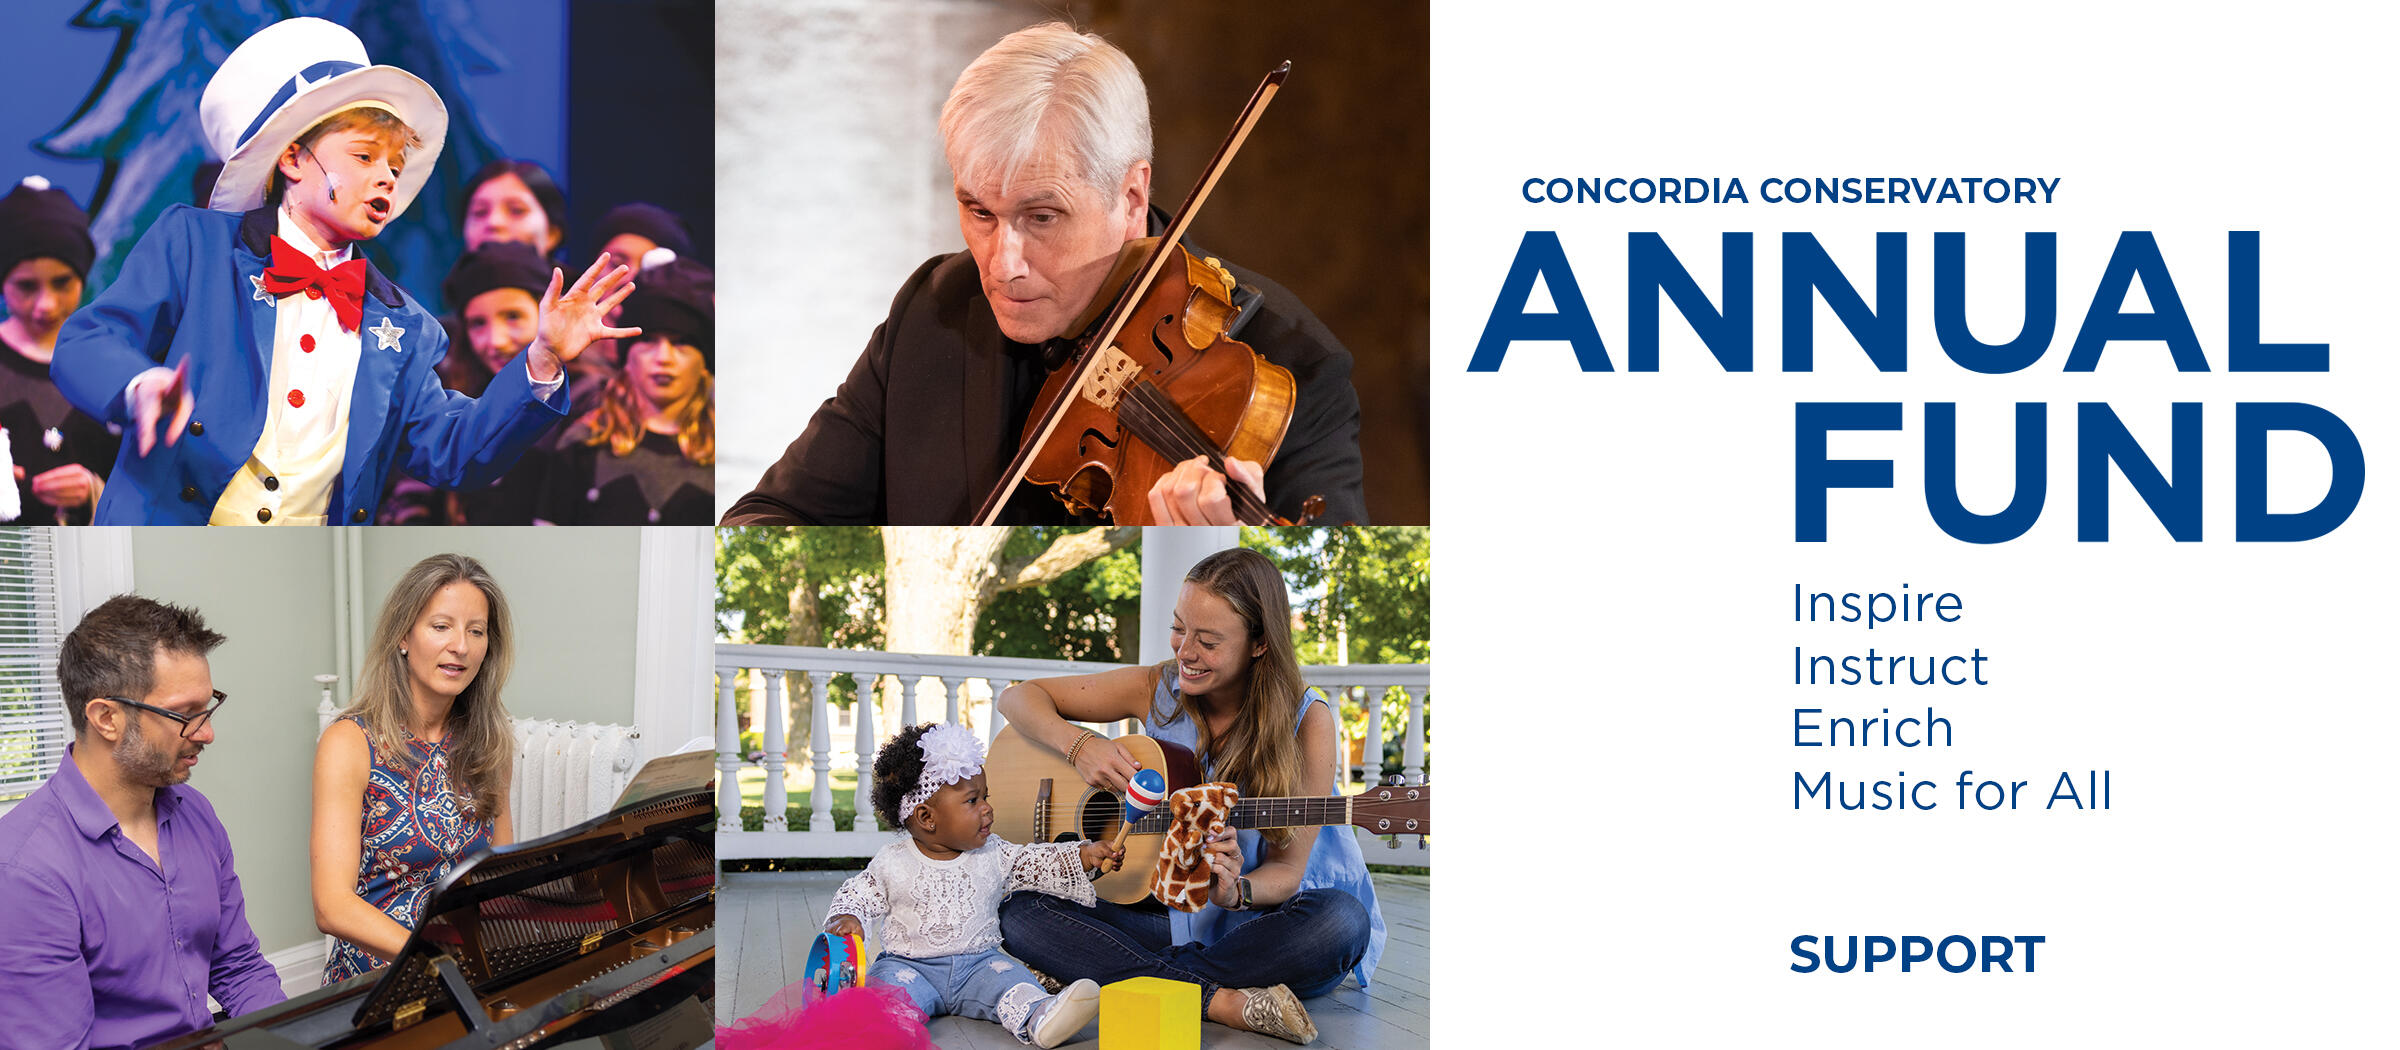 Please support the Concordia Conservatory annual fund 2023. Our goal is to raise $200,000 by July 1 to sustain our music programs in Scholarship & Outreach, UNIQUE for Special Learners, Musical Adventures Family Series, Hoch Chamber Music, More Than Music, and Music & Art Therapy 